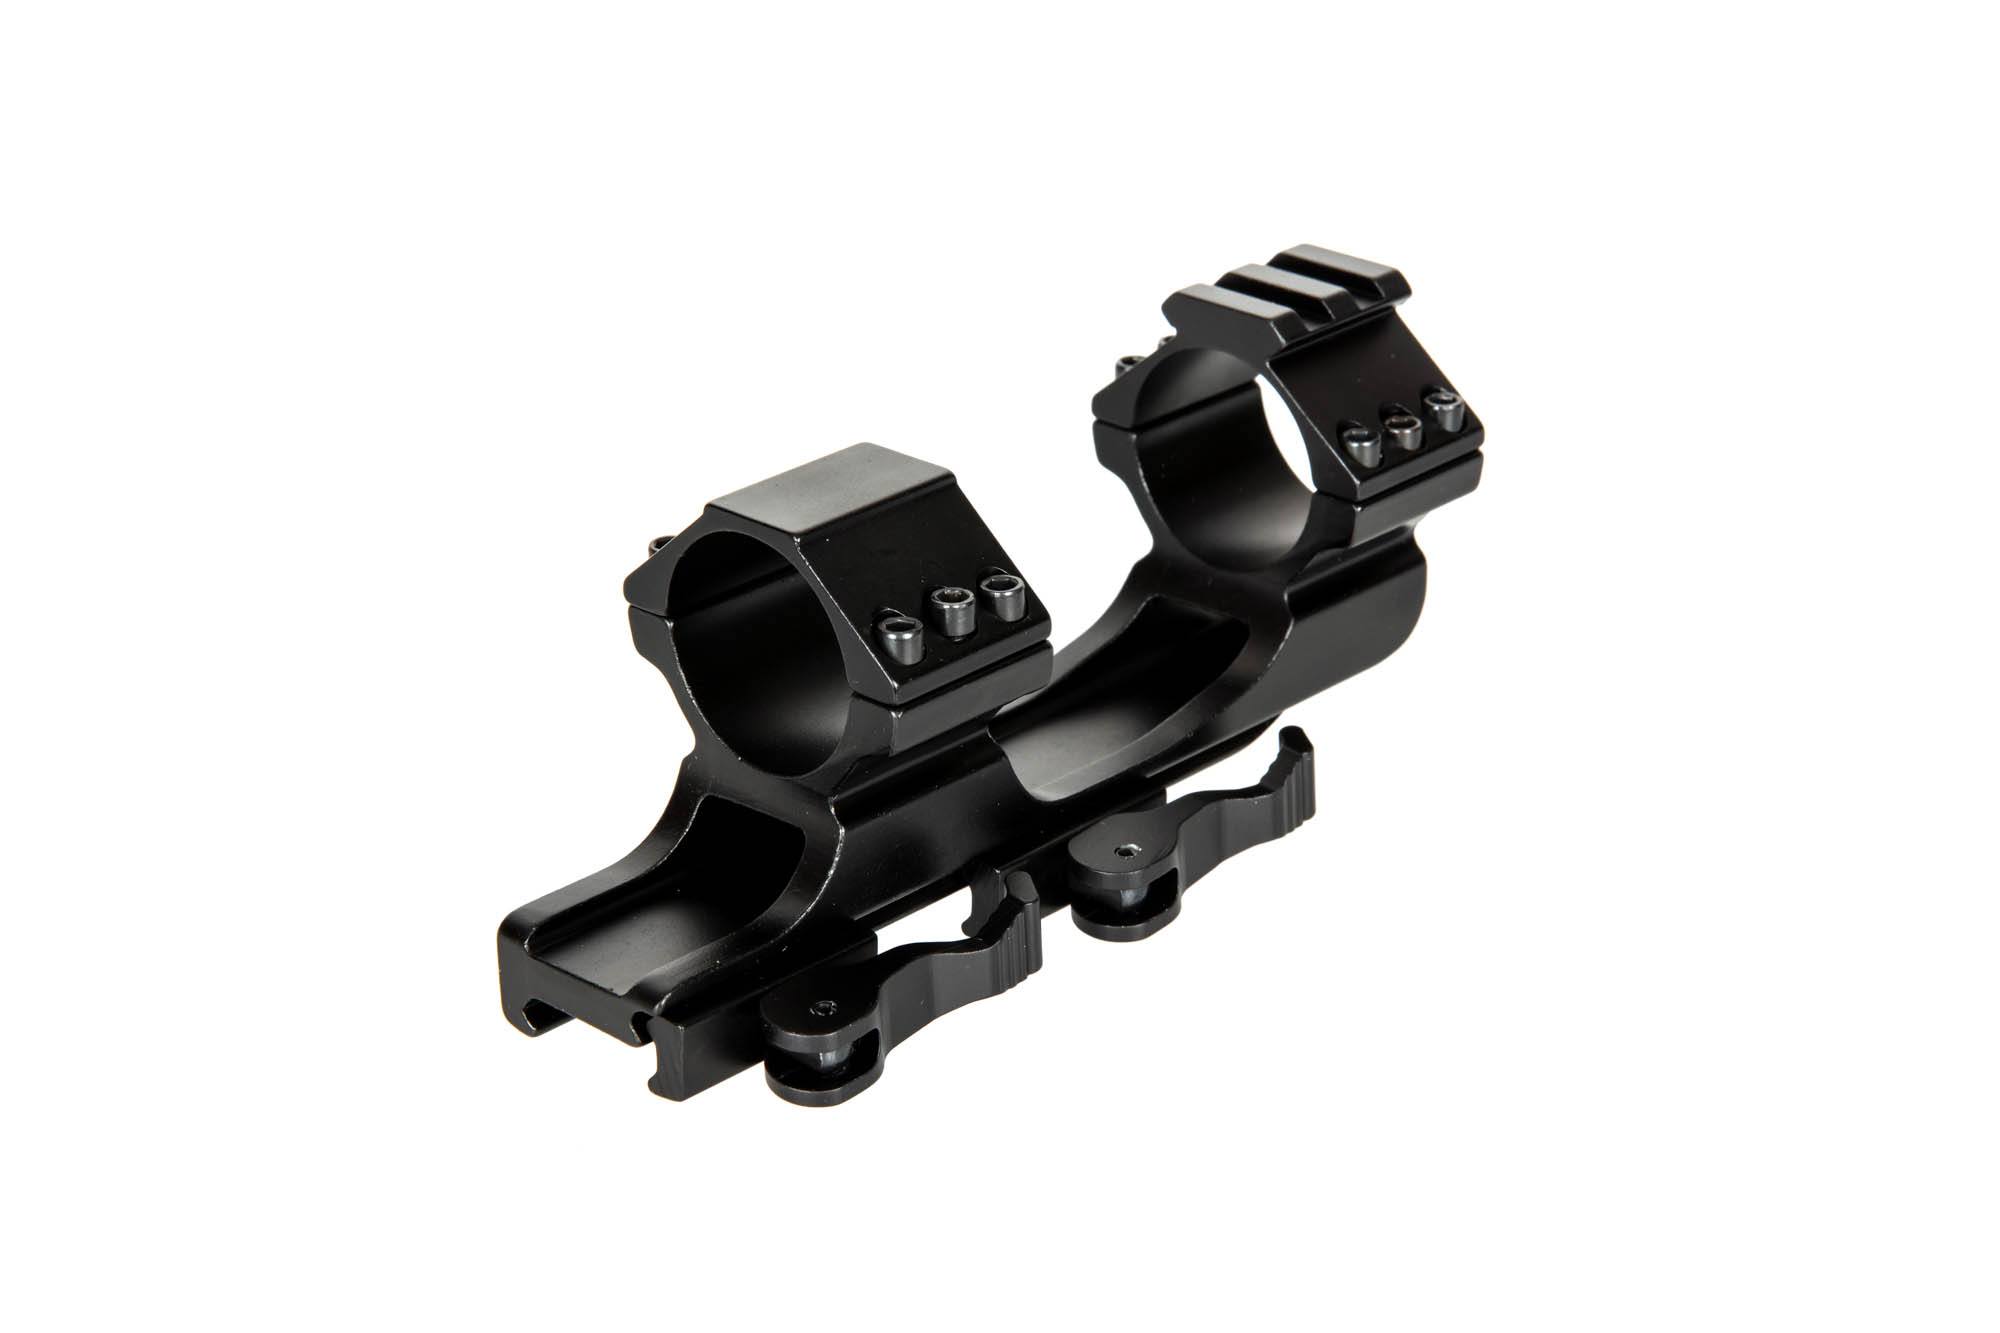 One Piece 30mm QD Mount for RIS / Picatinny by Vector Optics on Airsoft Mania Europe